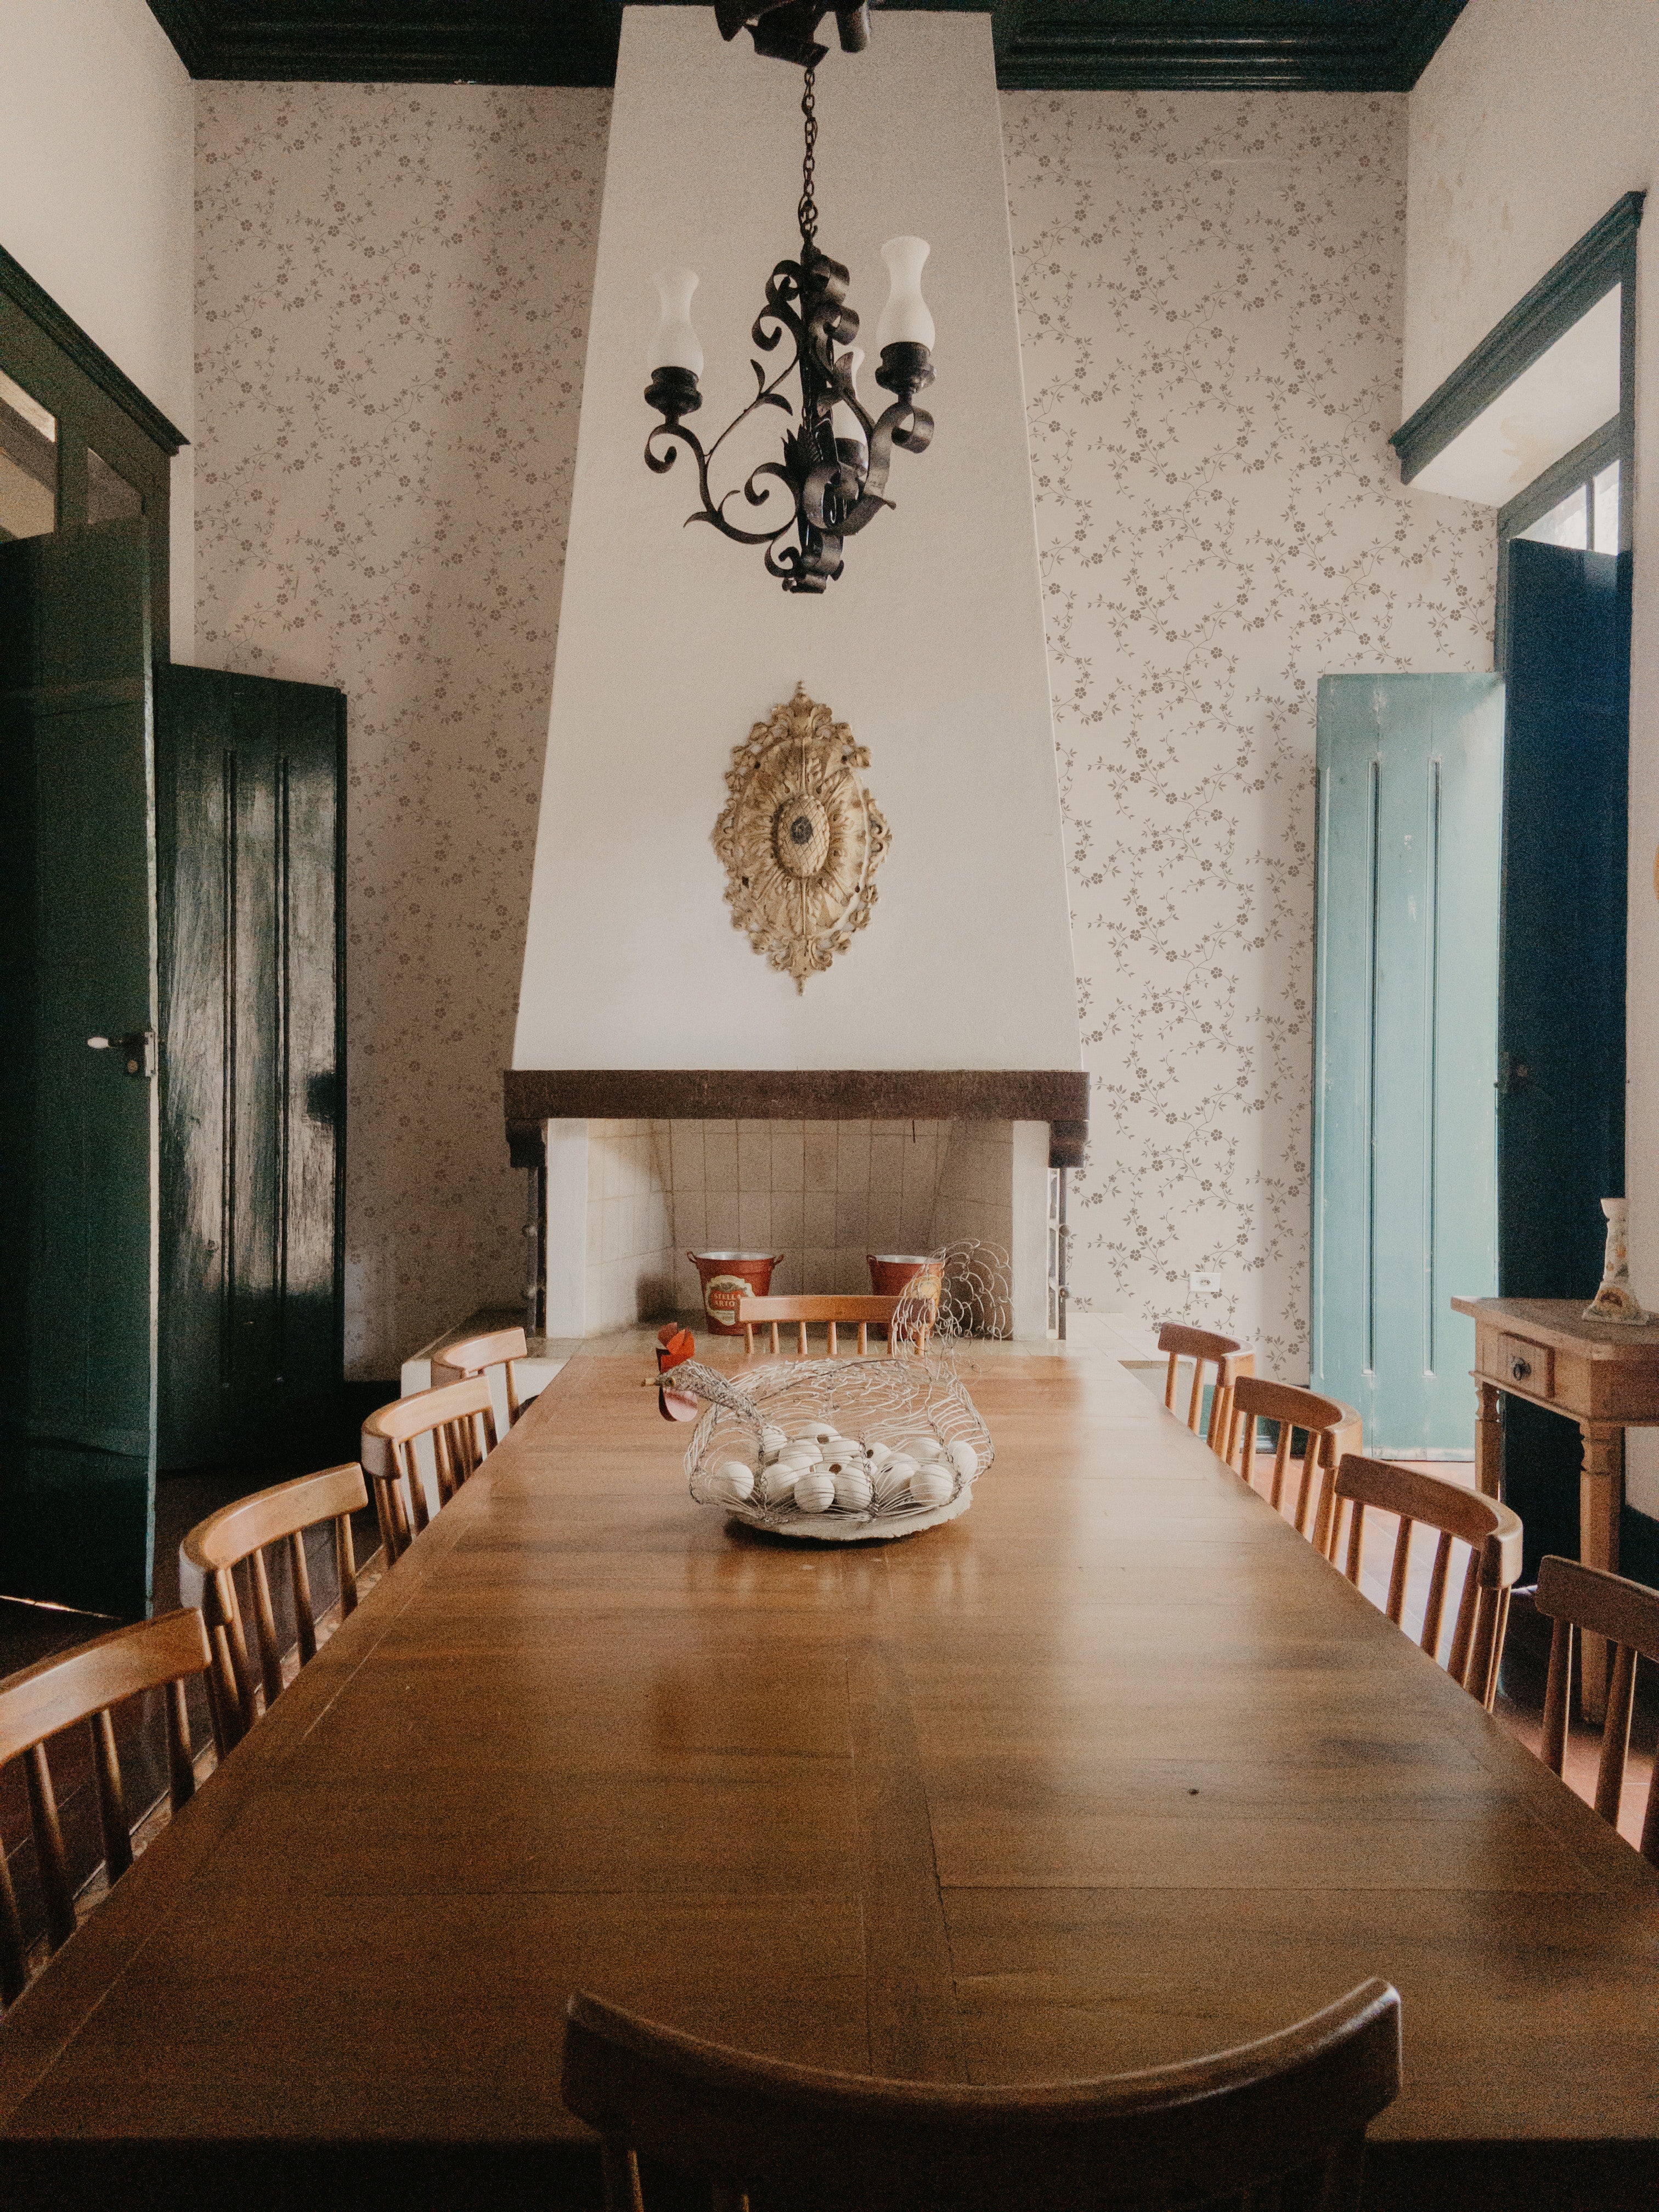 An elegant dining room with a large wooden table set against a wall adorned with 'Charming Floral Wallpaper', featuring a subtle pattern of beige flowers on an off-white background. A vintage chandelier hangs above, enhancing the room's classic charm.